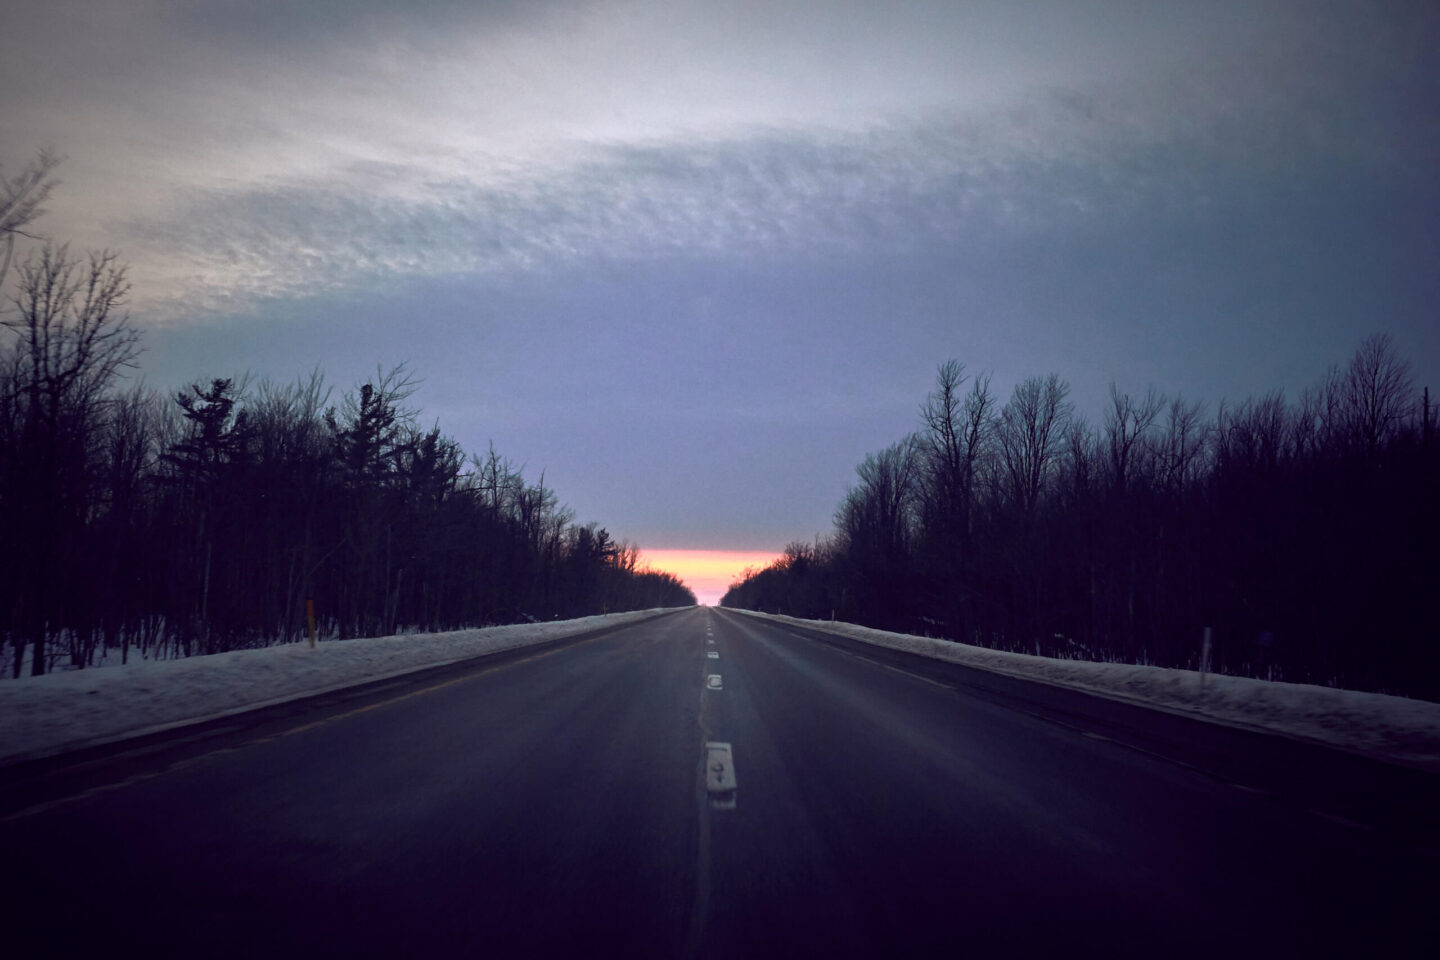 Fuji x100T - Roadtrip to Syracuse New York - Symmetry on the highway